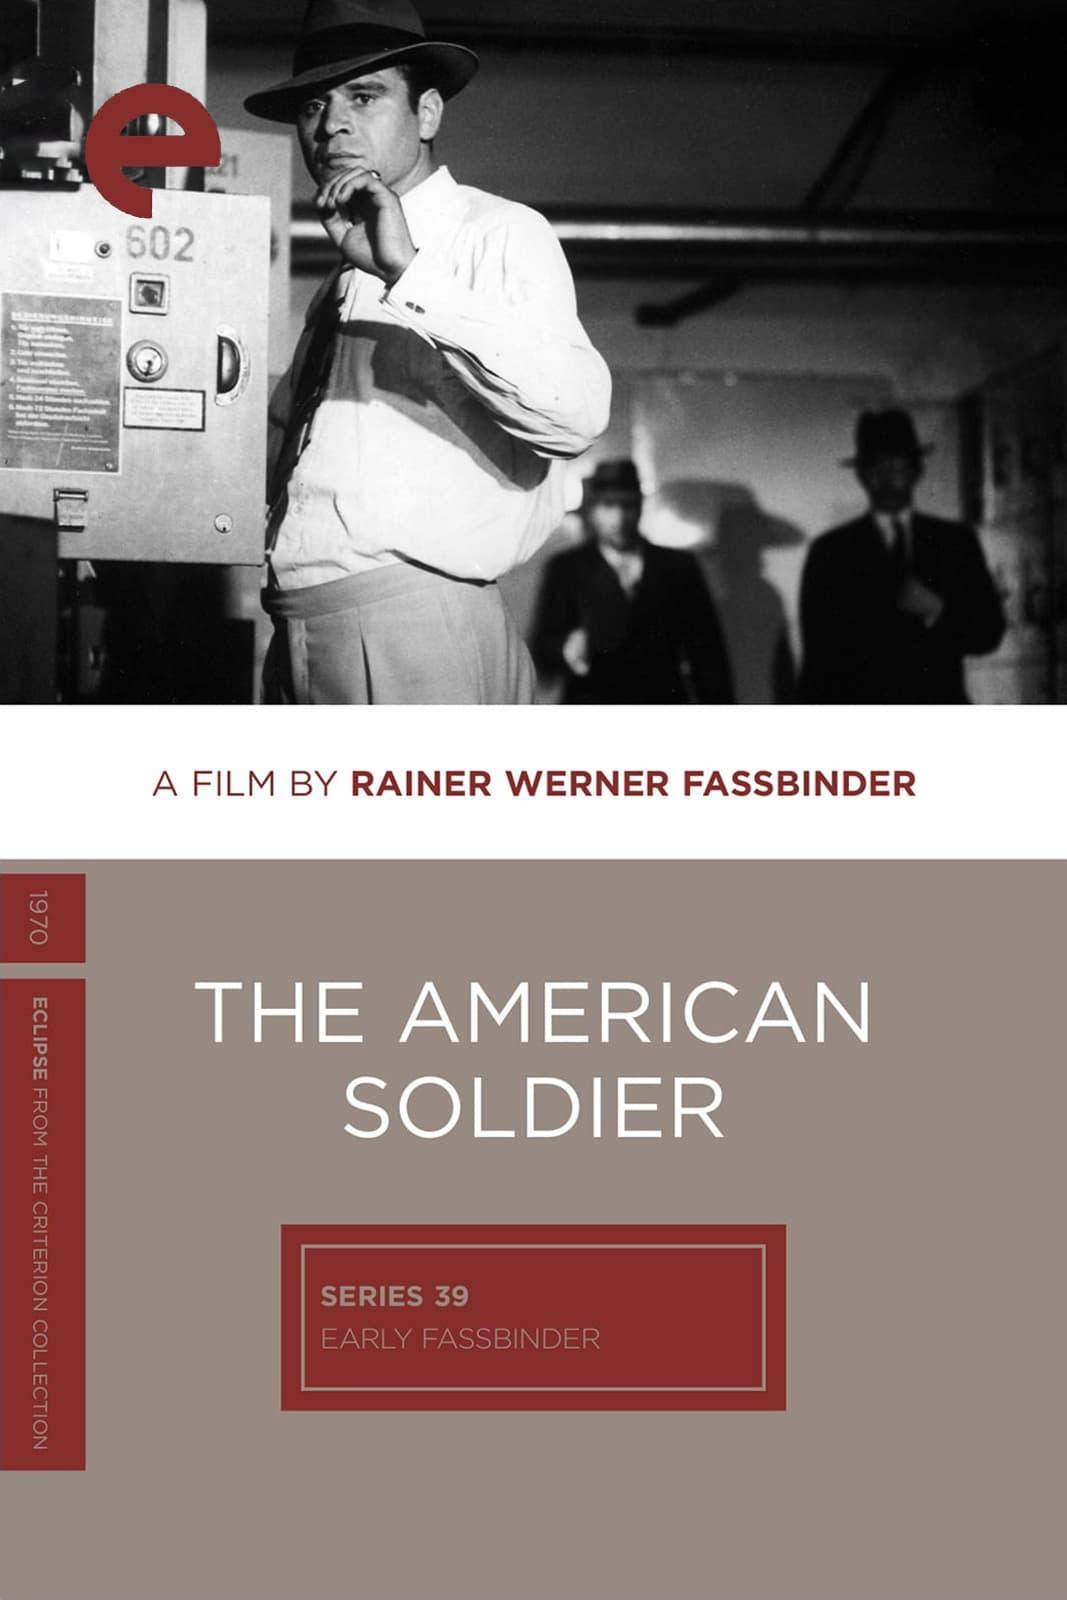 The American Soldier poster